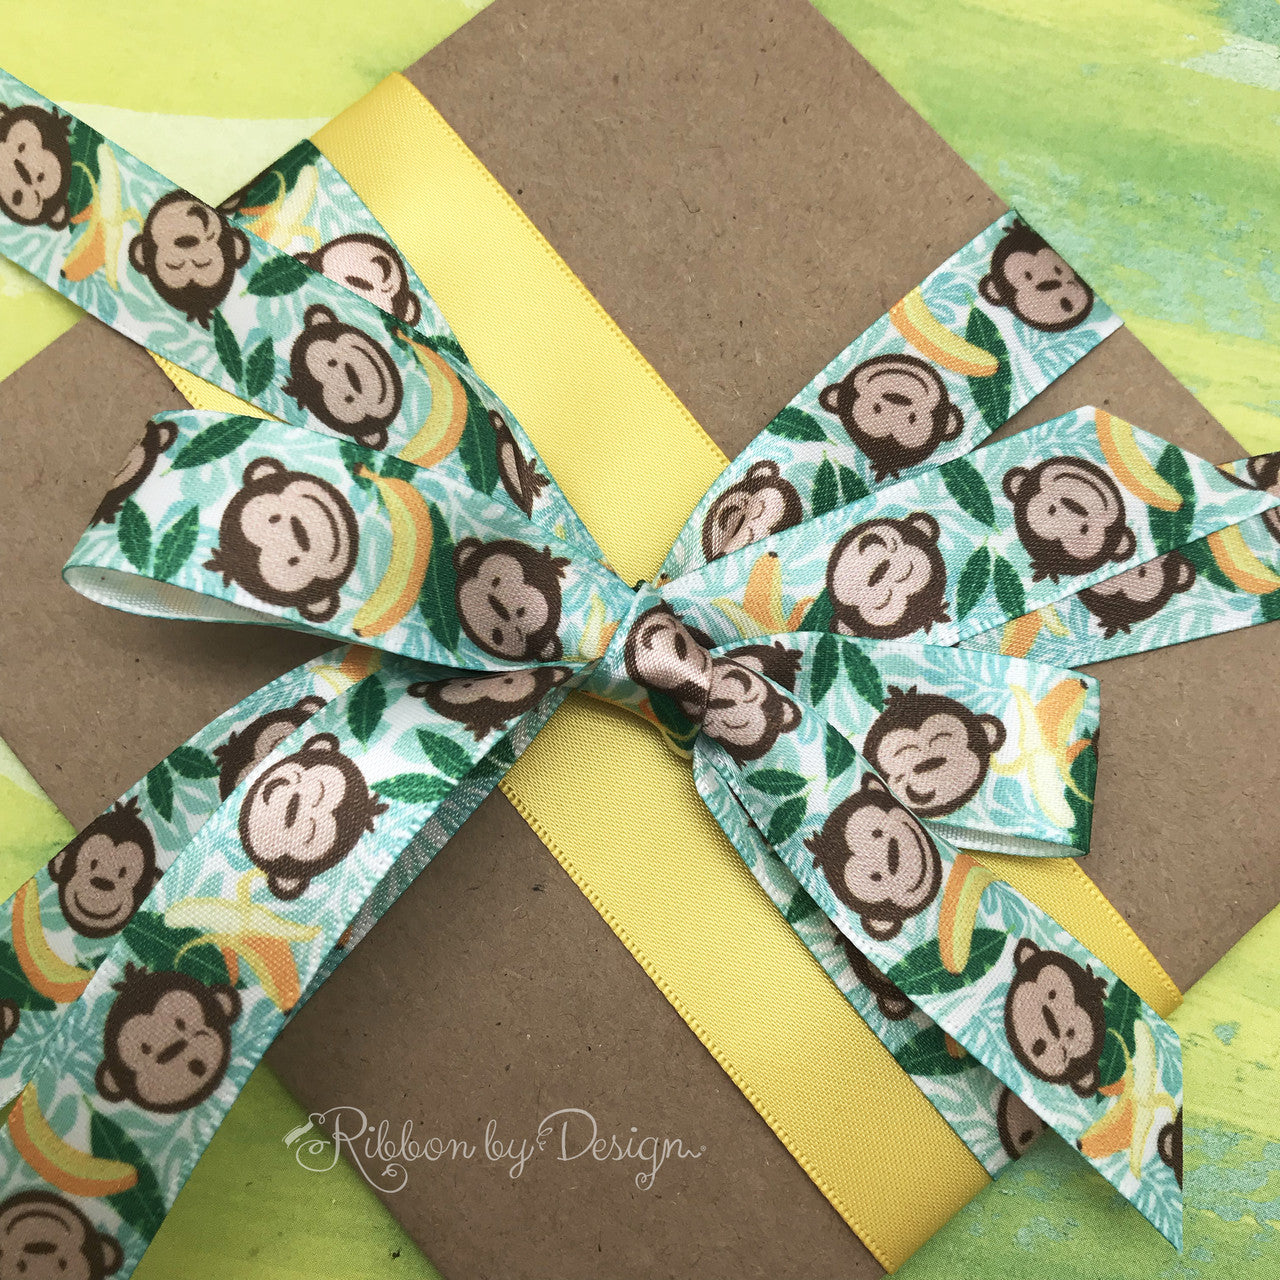 This fun little package is paired with a yellow 1/5" satin ribbon to really make the pattern pop! Combining ribbons on a single package makes for some very interesting gift wrap!